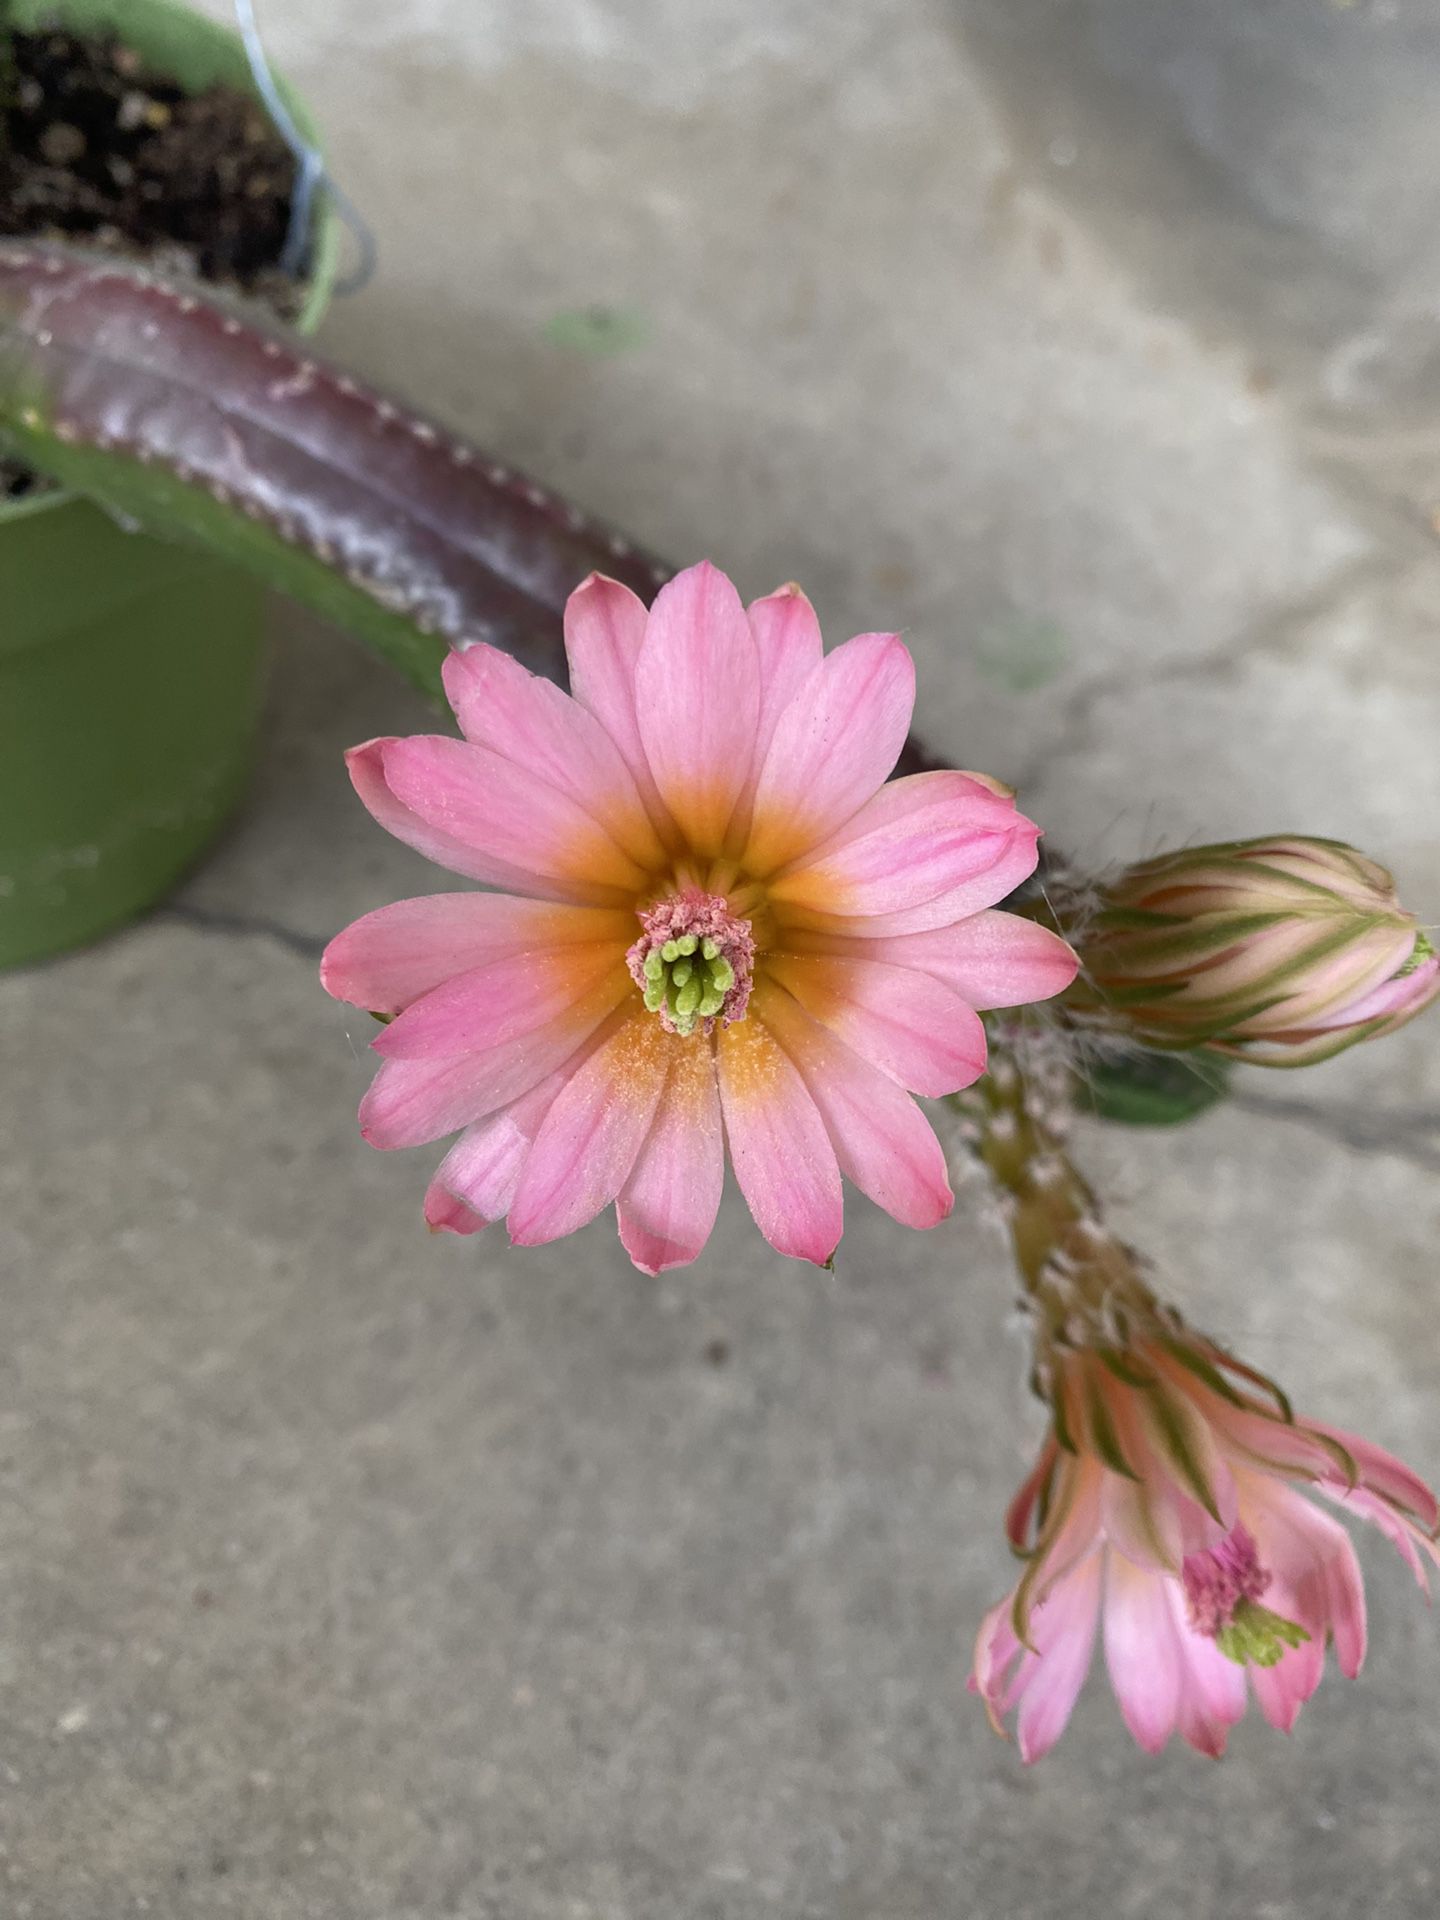 Beautiful Rare Blooming  Echinocereus Gentry Cactus Plant, The Flowers Stay Open For 5 Days. Is In 6 Inch Pot Pick Up Only